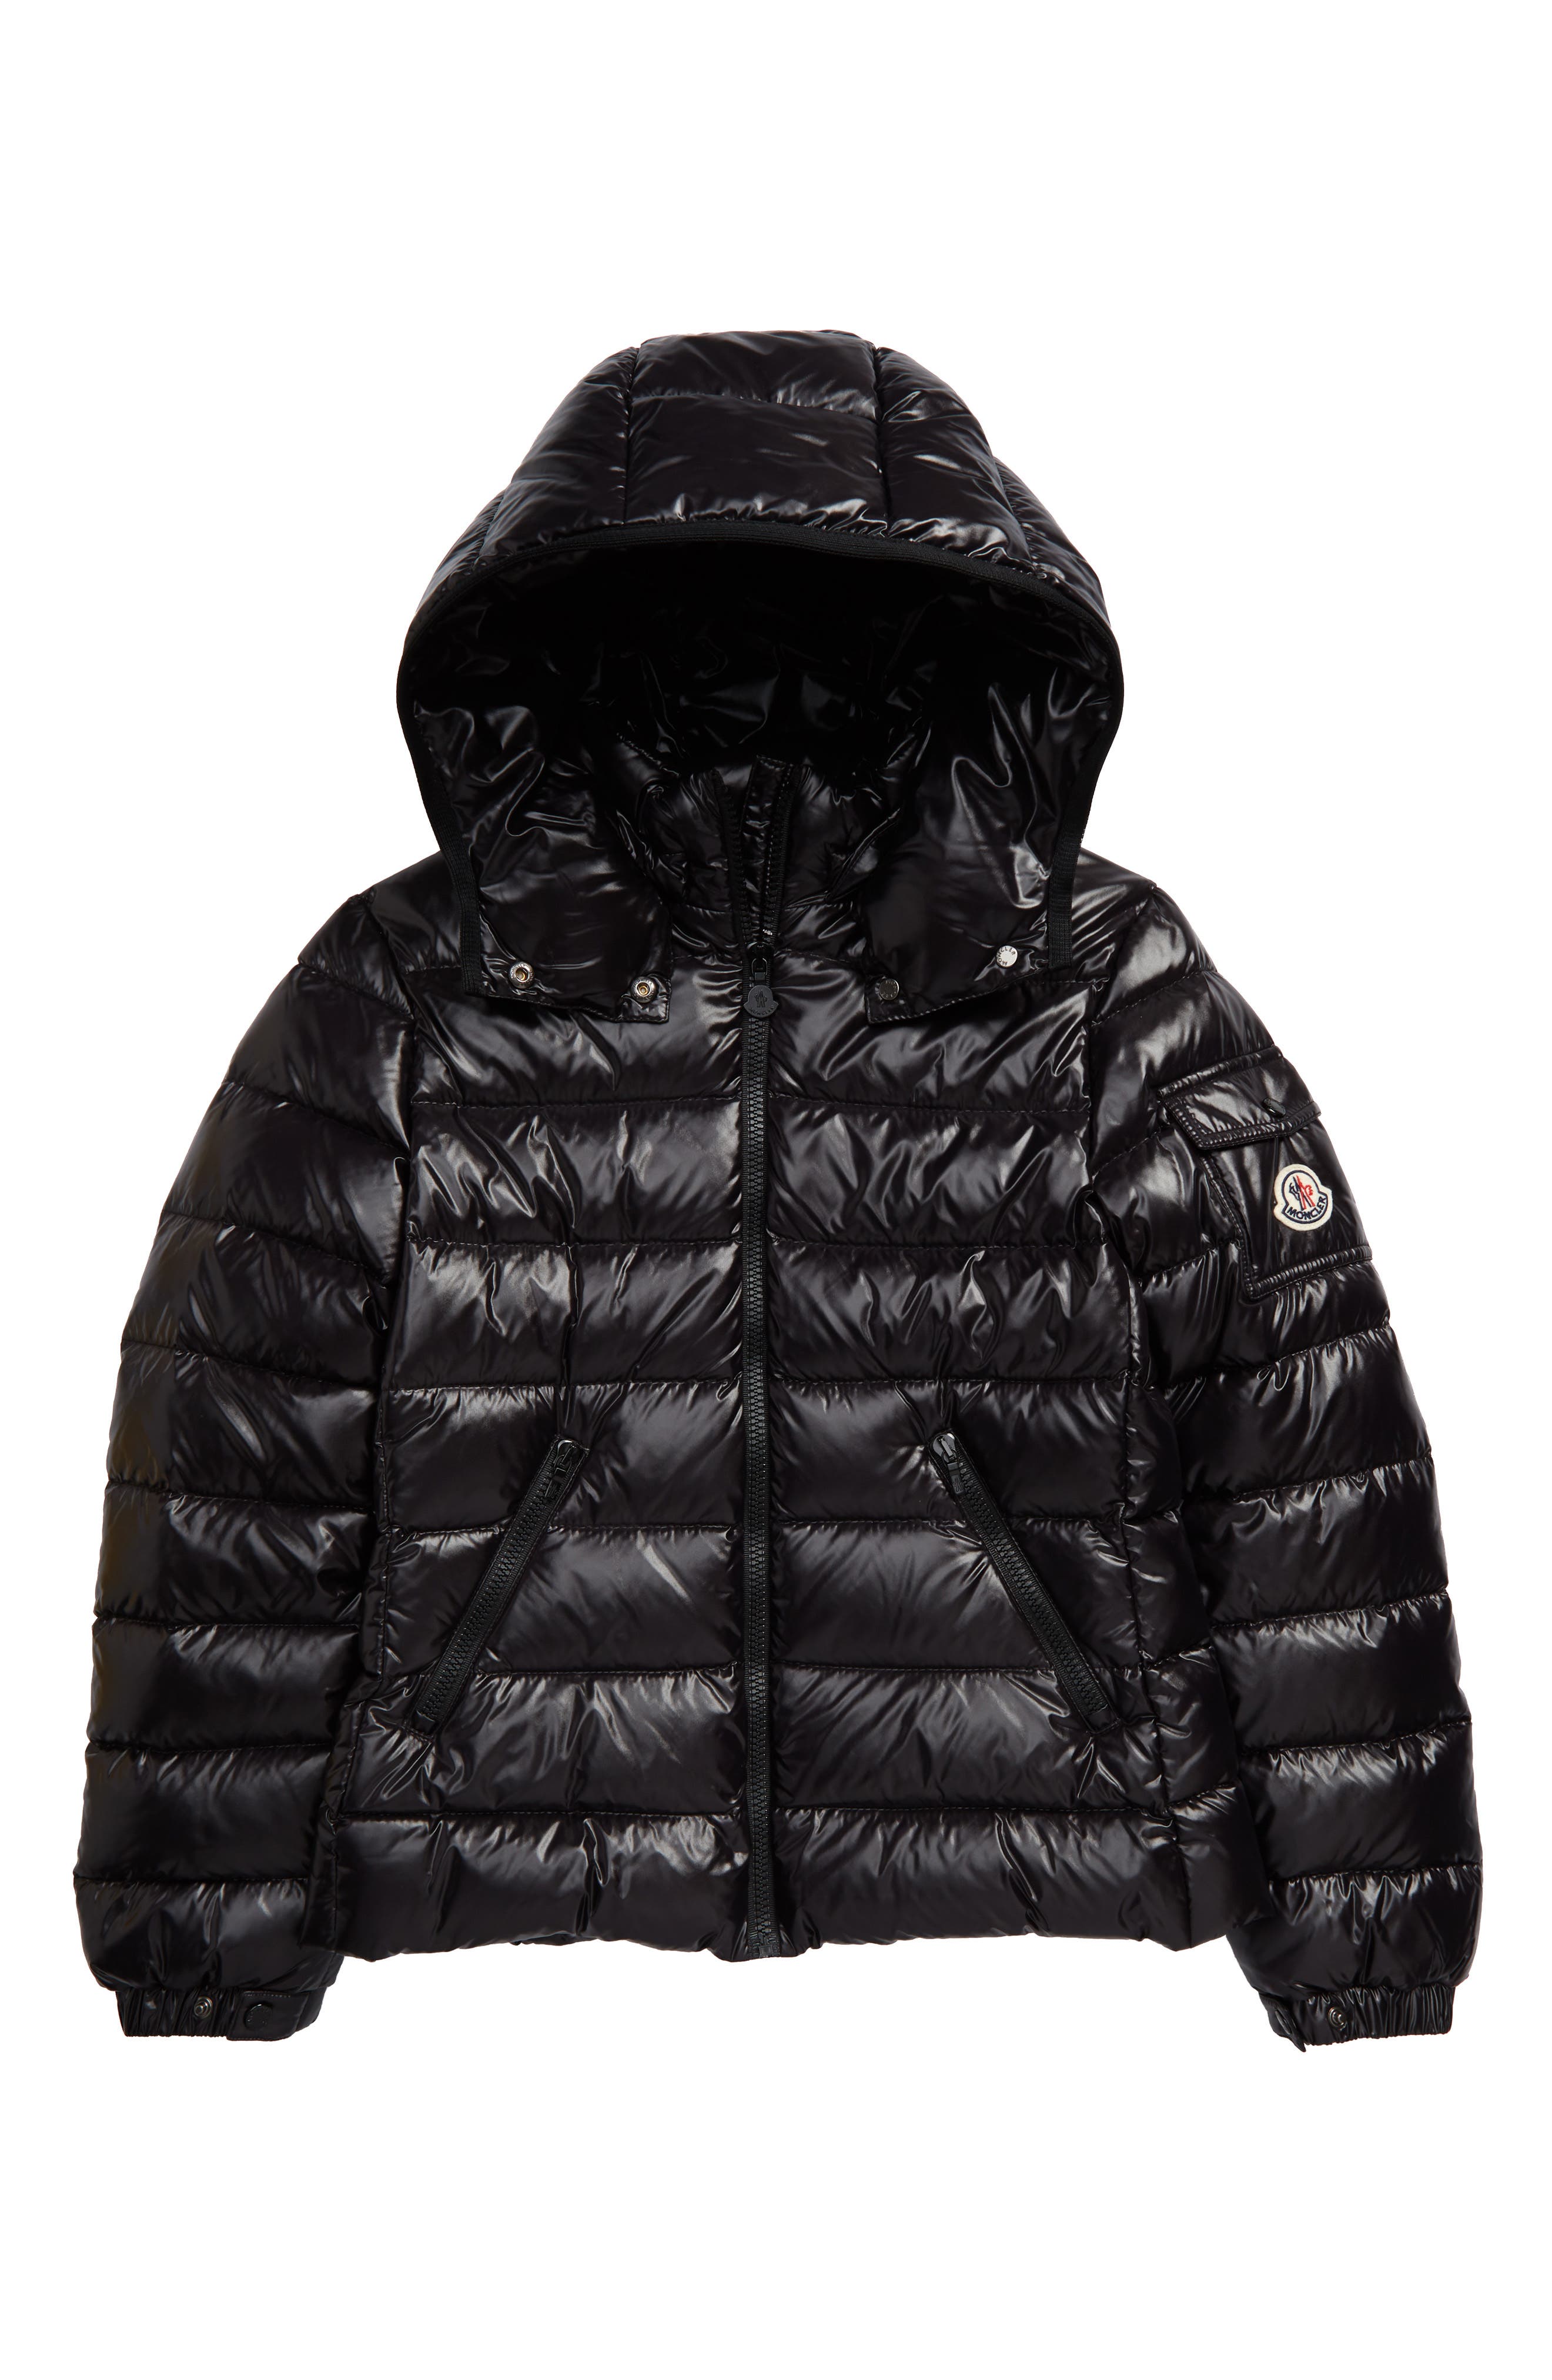 Black Moncler Puffer Jacket Top Sellers, UP TO 70% OFF | www 